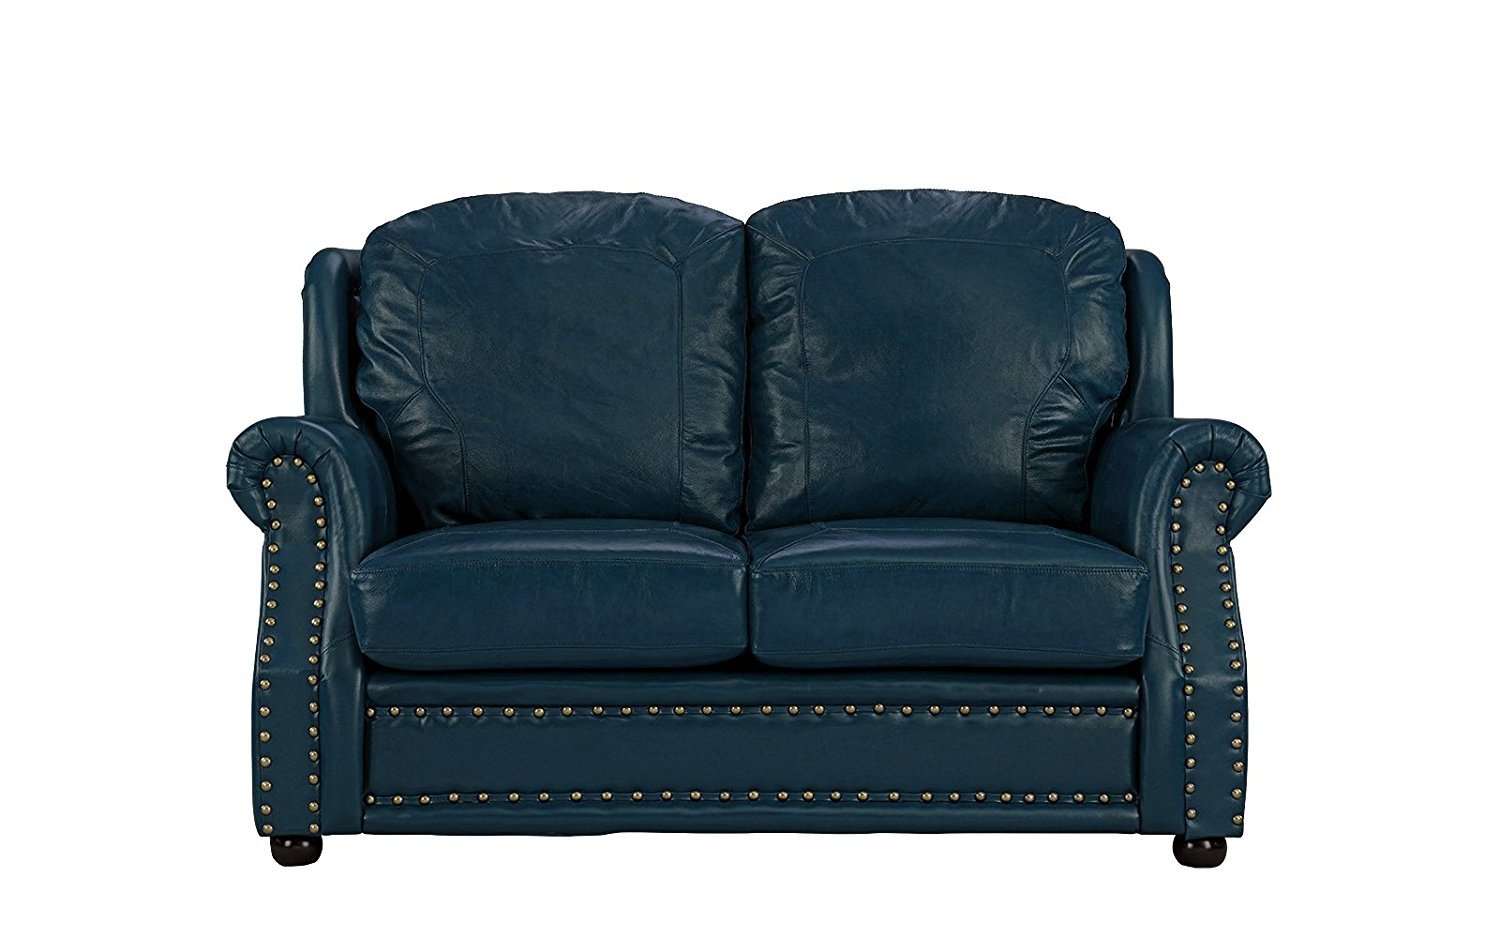 Leather Sofa 2 Seater, Living Room Couch Love Seat with Nailhead Trim (Blue) 662187610559 eBay